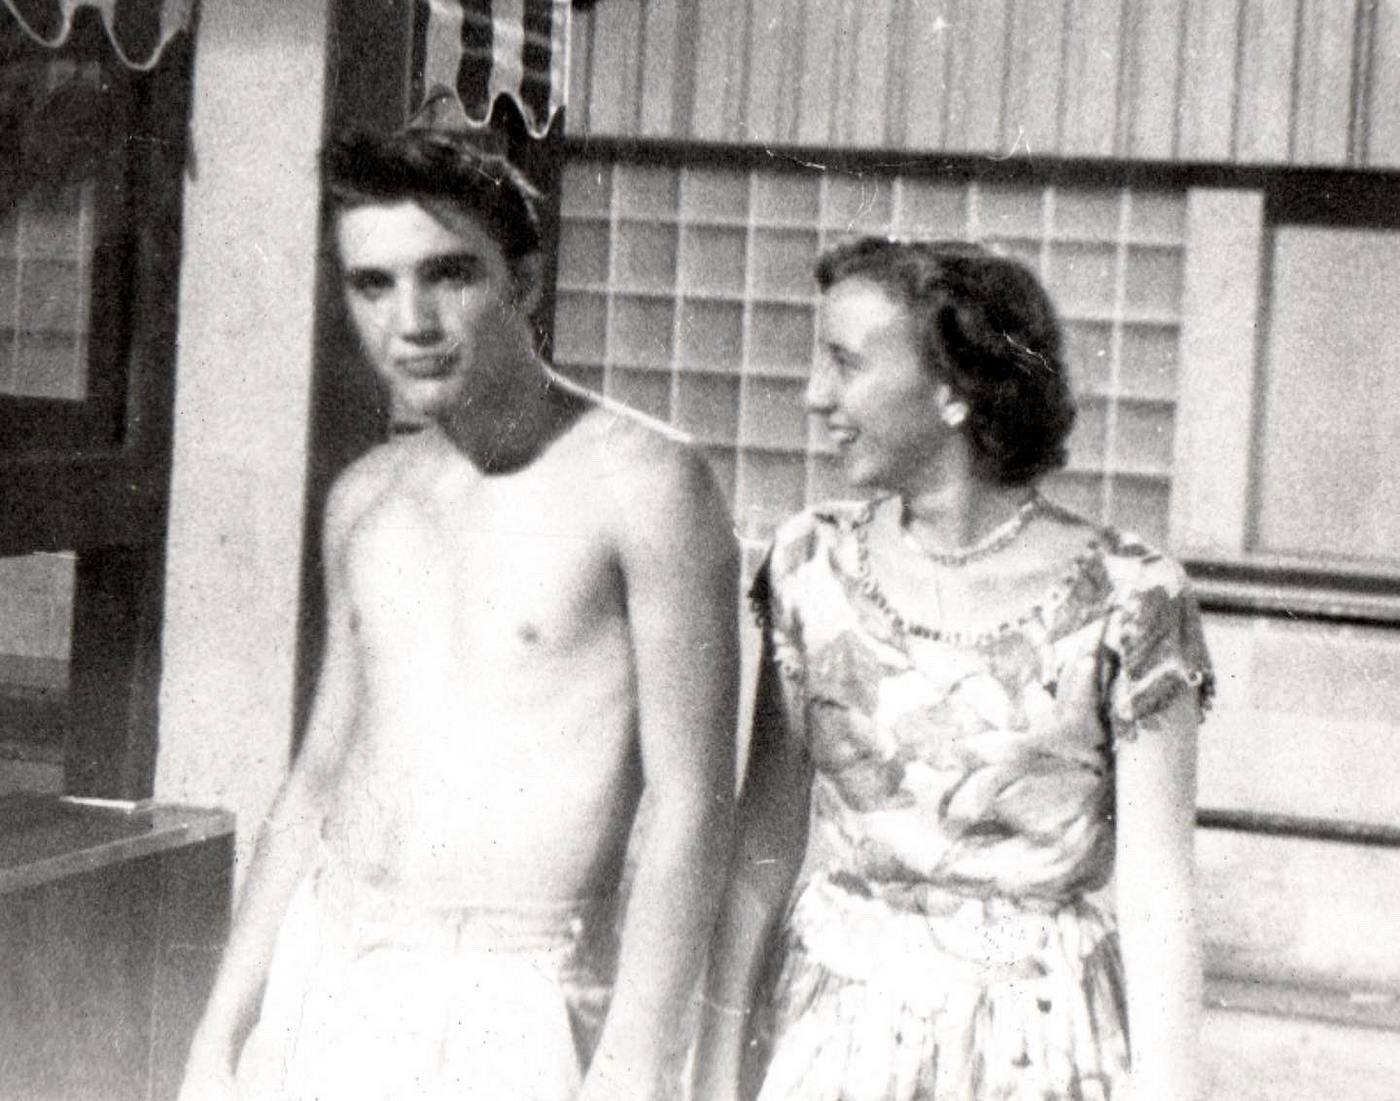 The sexuality of Elvis Presley